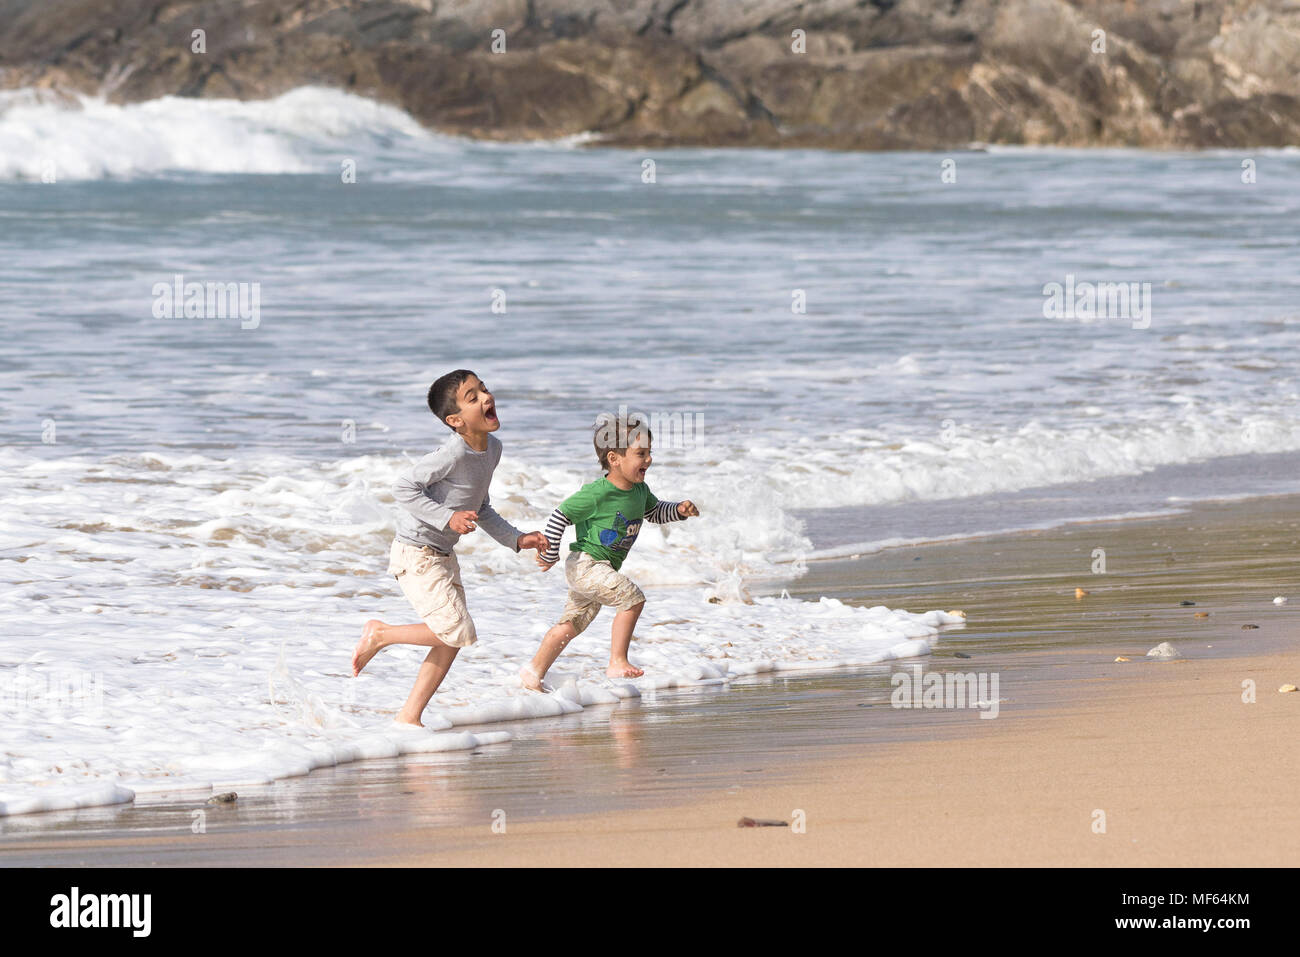 Children on a staycation holiday having fun at the seaside. Stock Photo